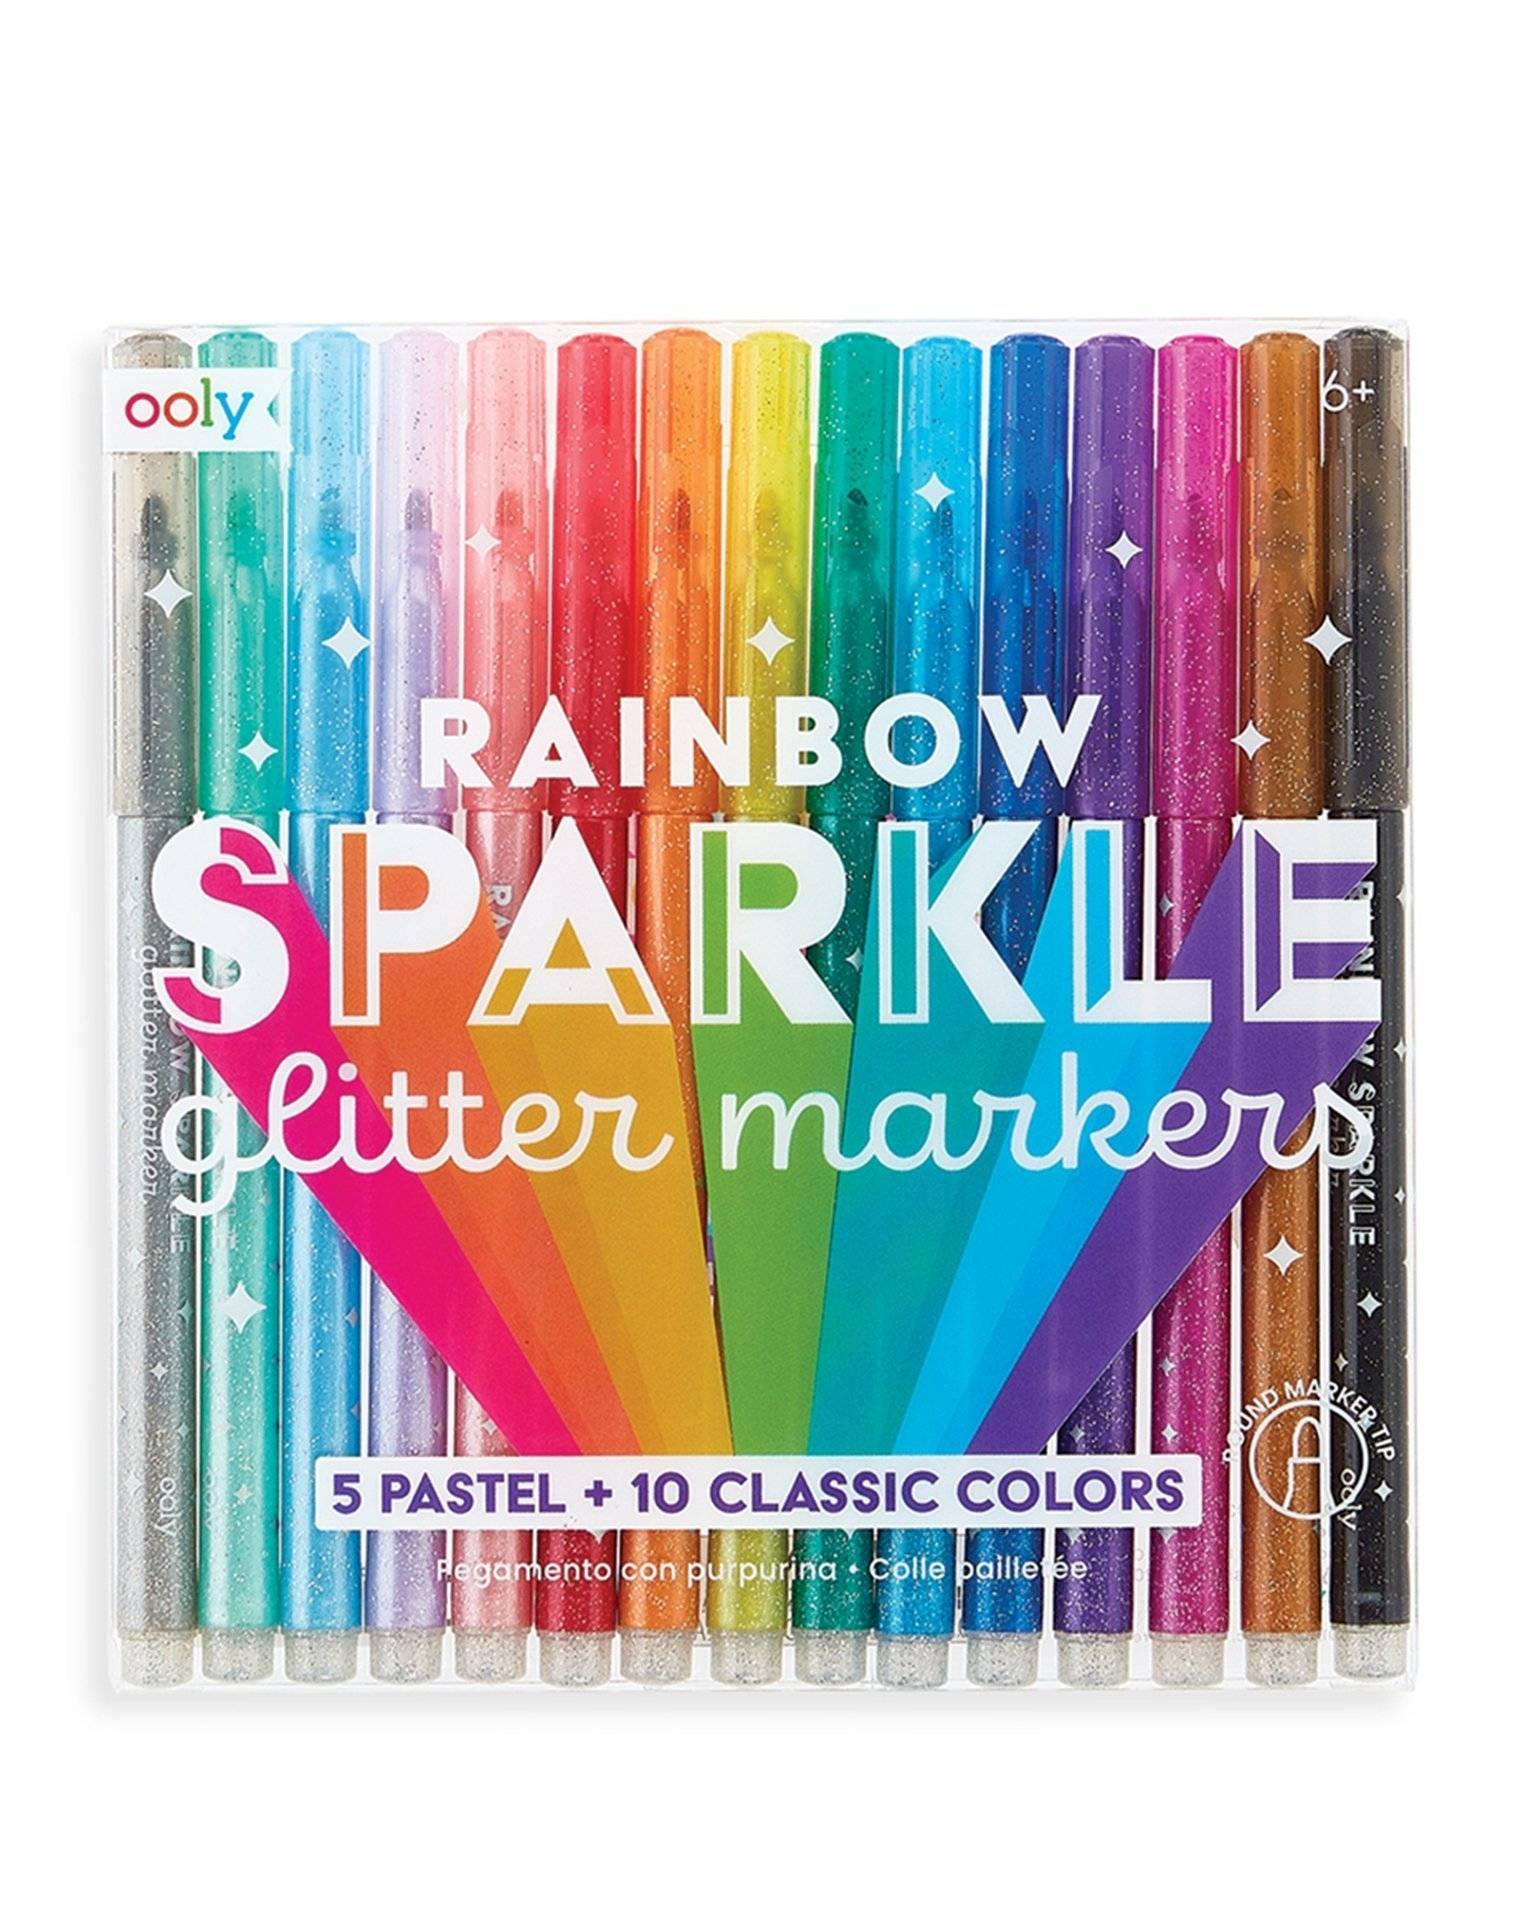 Ooly Rainbow Sparkle Glitter Markers - Round Marker Tip Opening